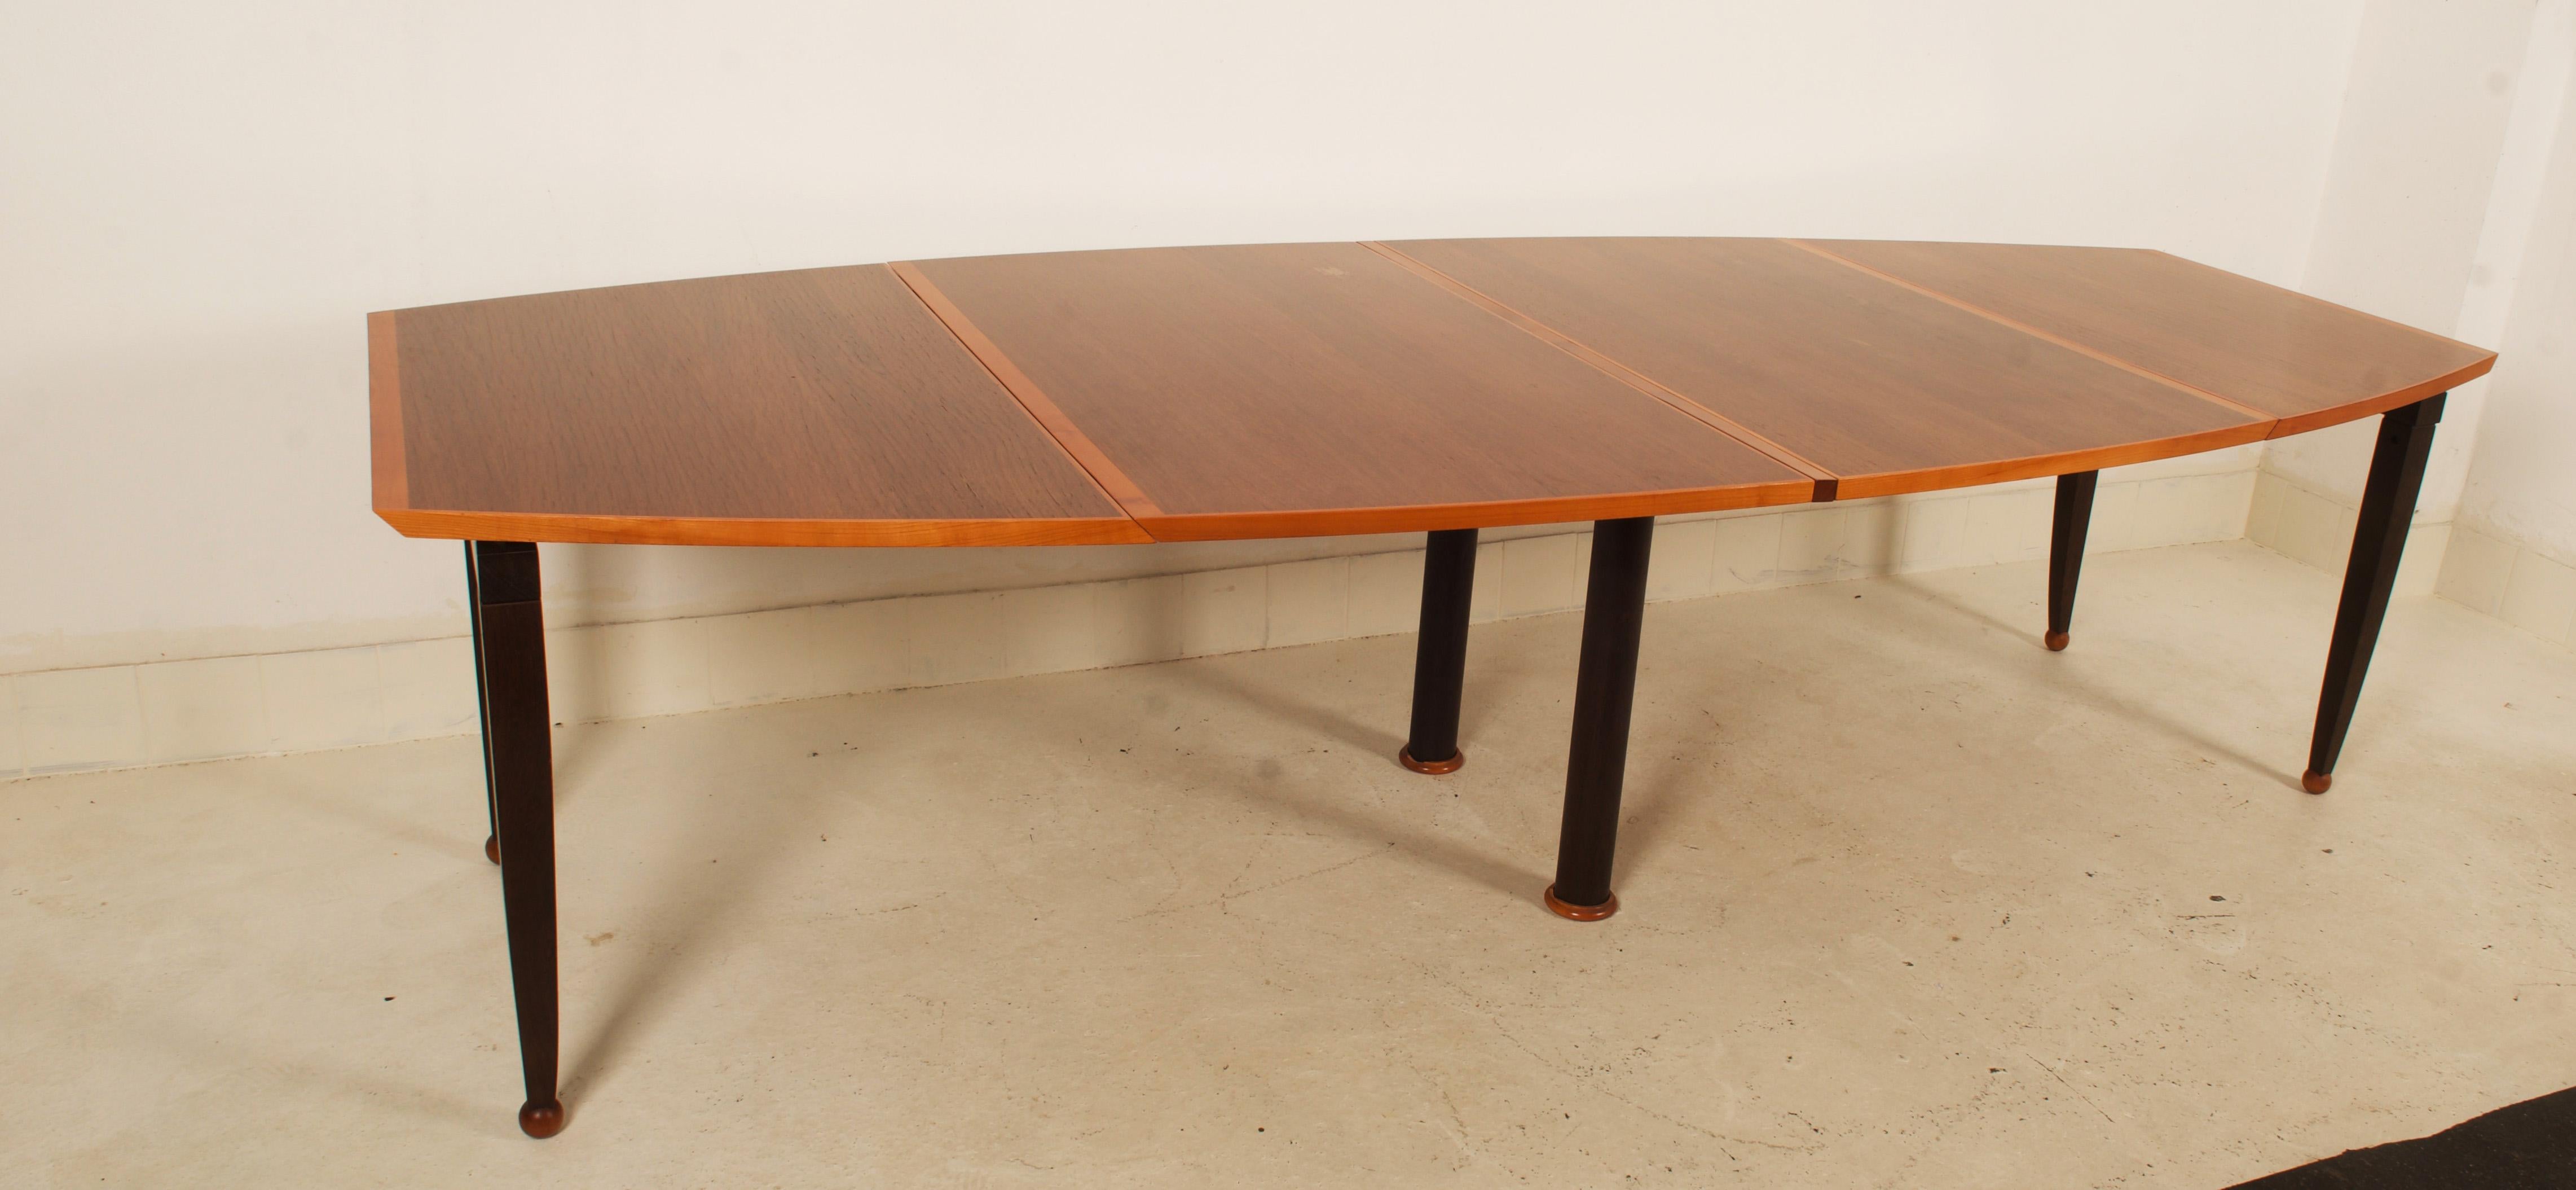 Tabula Magna Dining Table by Oscar Tosquets Blanca for Driade Aleph  For Sale 12